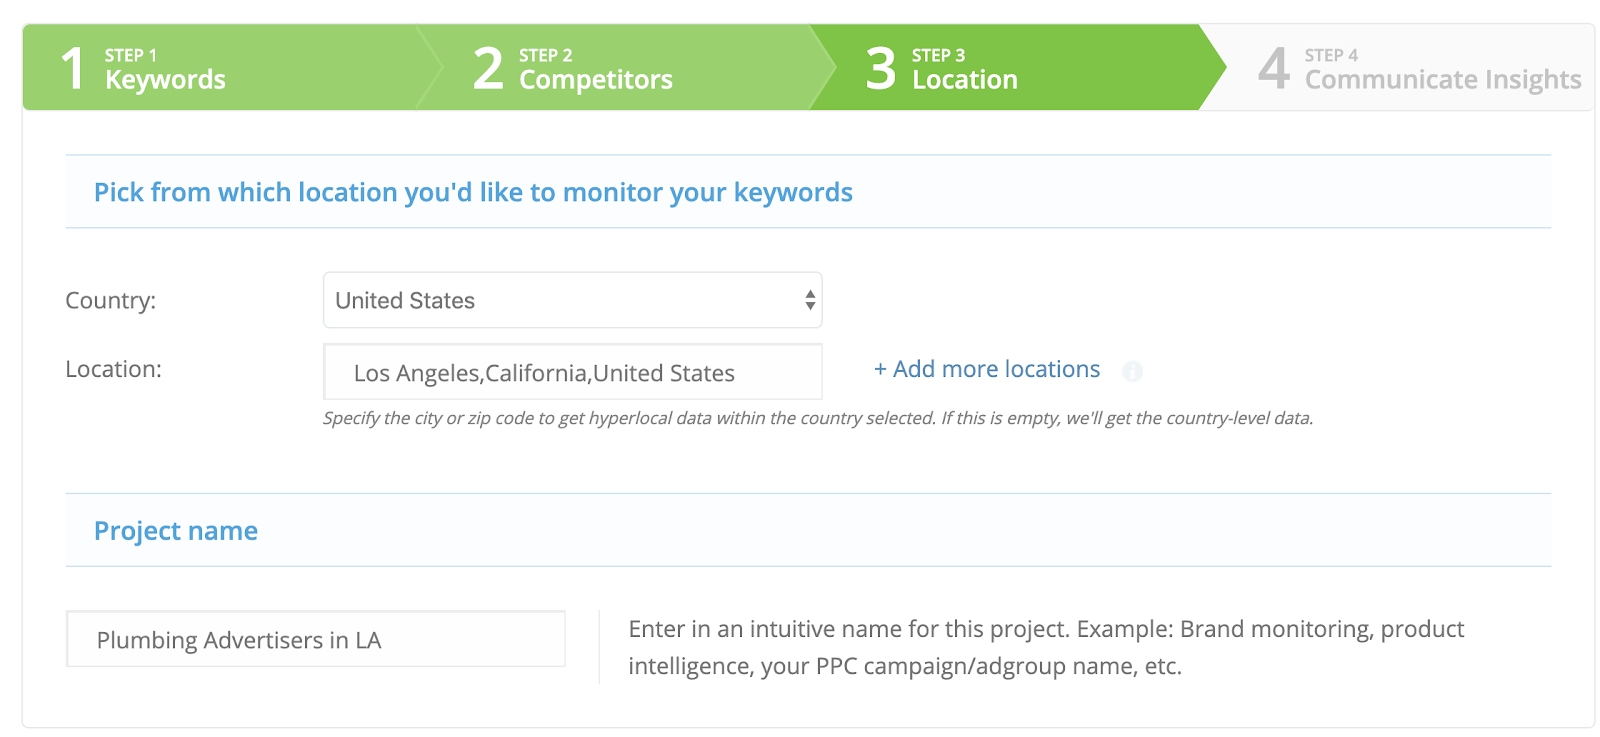 Create Campaign Watch Project 2: Add location data to monitor keywords